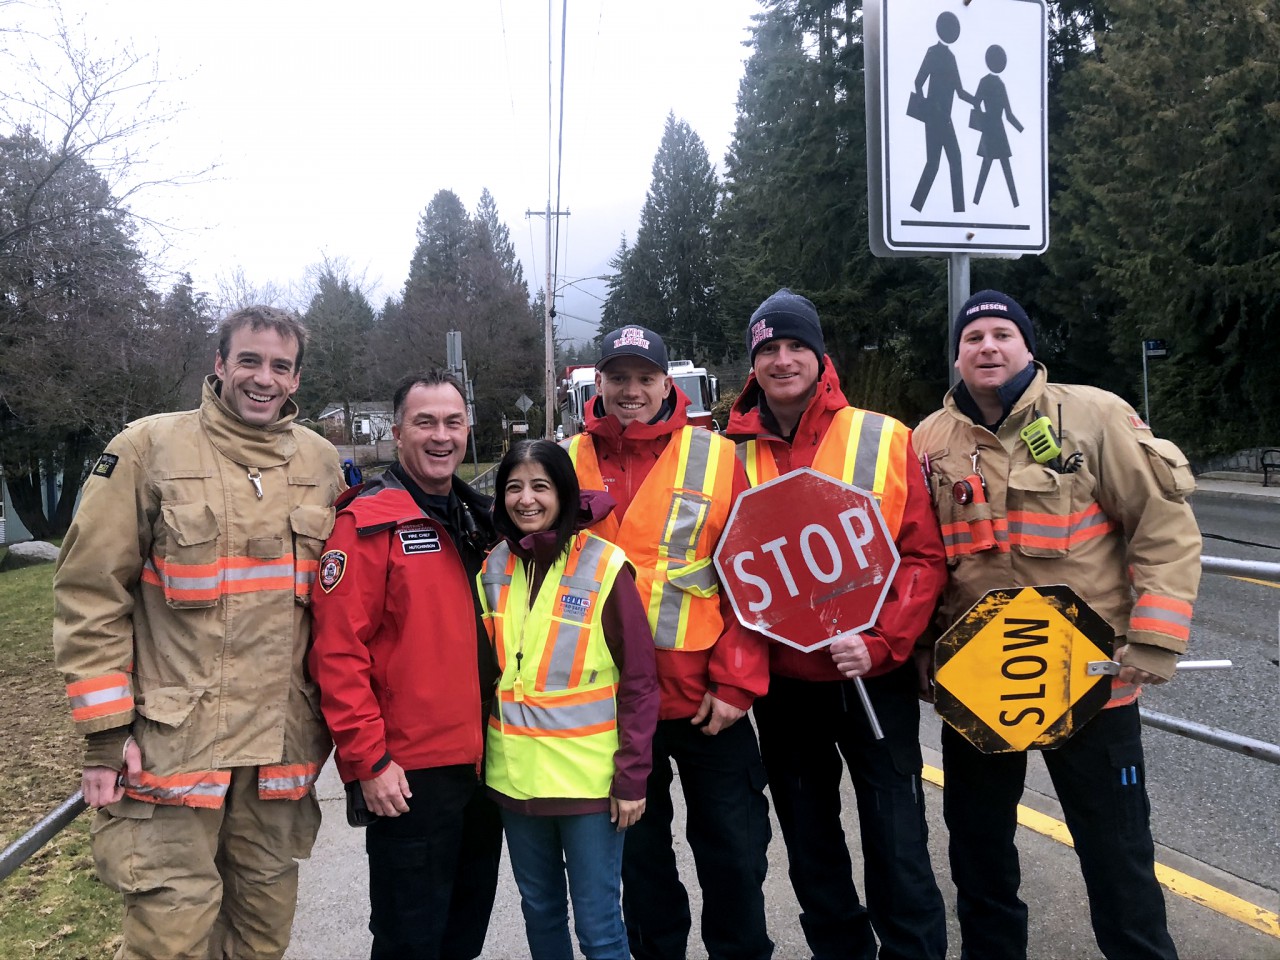 A group of smiling DNVFRS members, with one holding a stop sign.